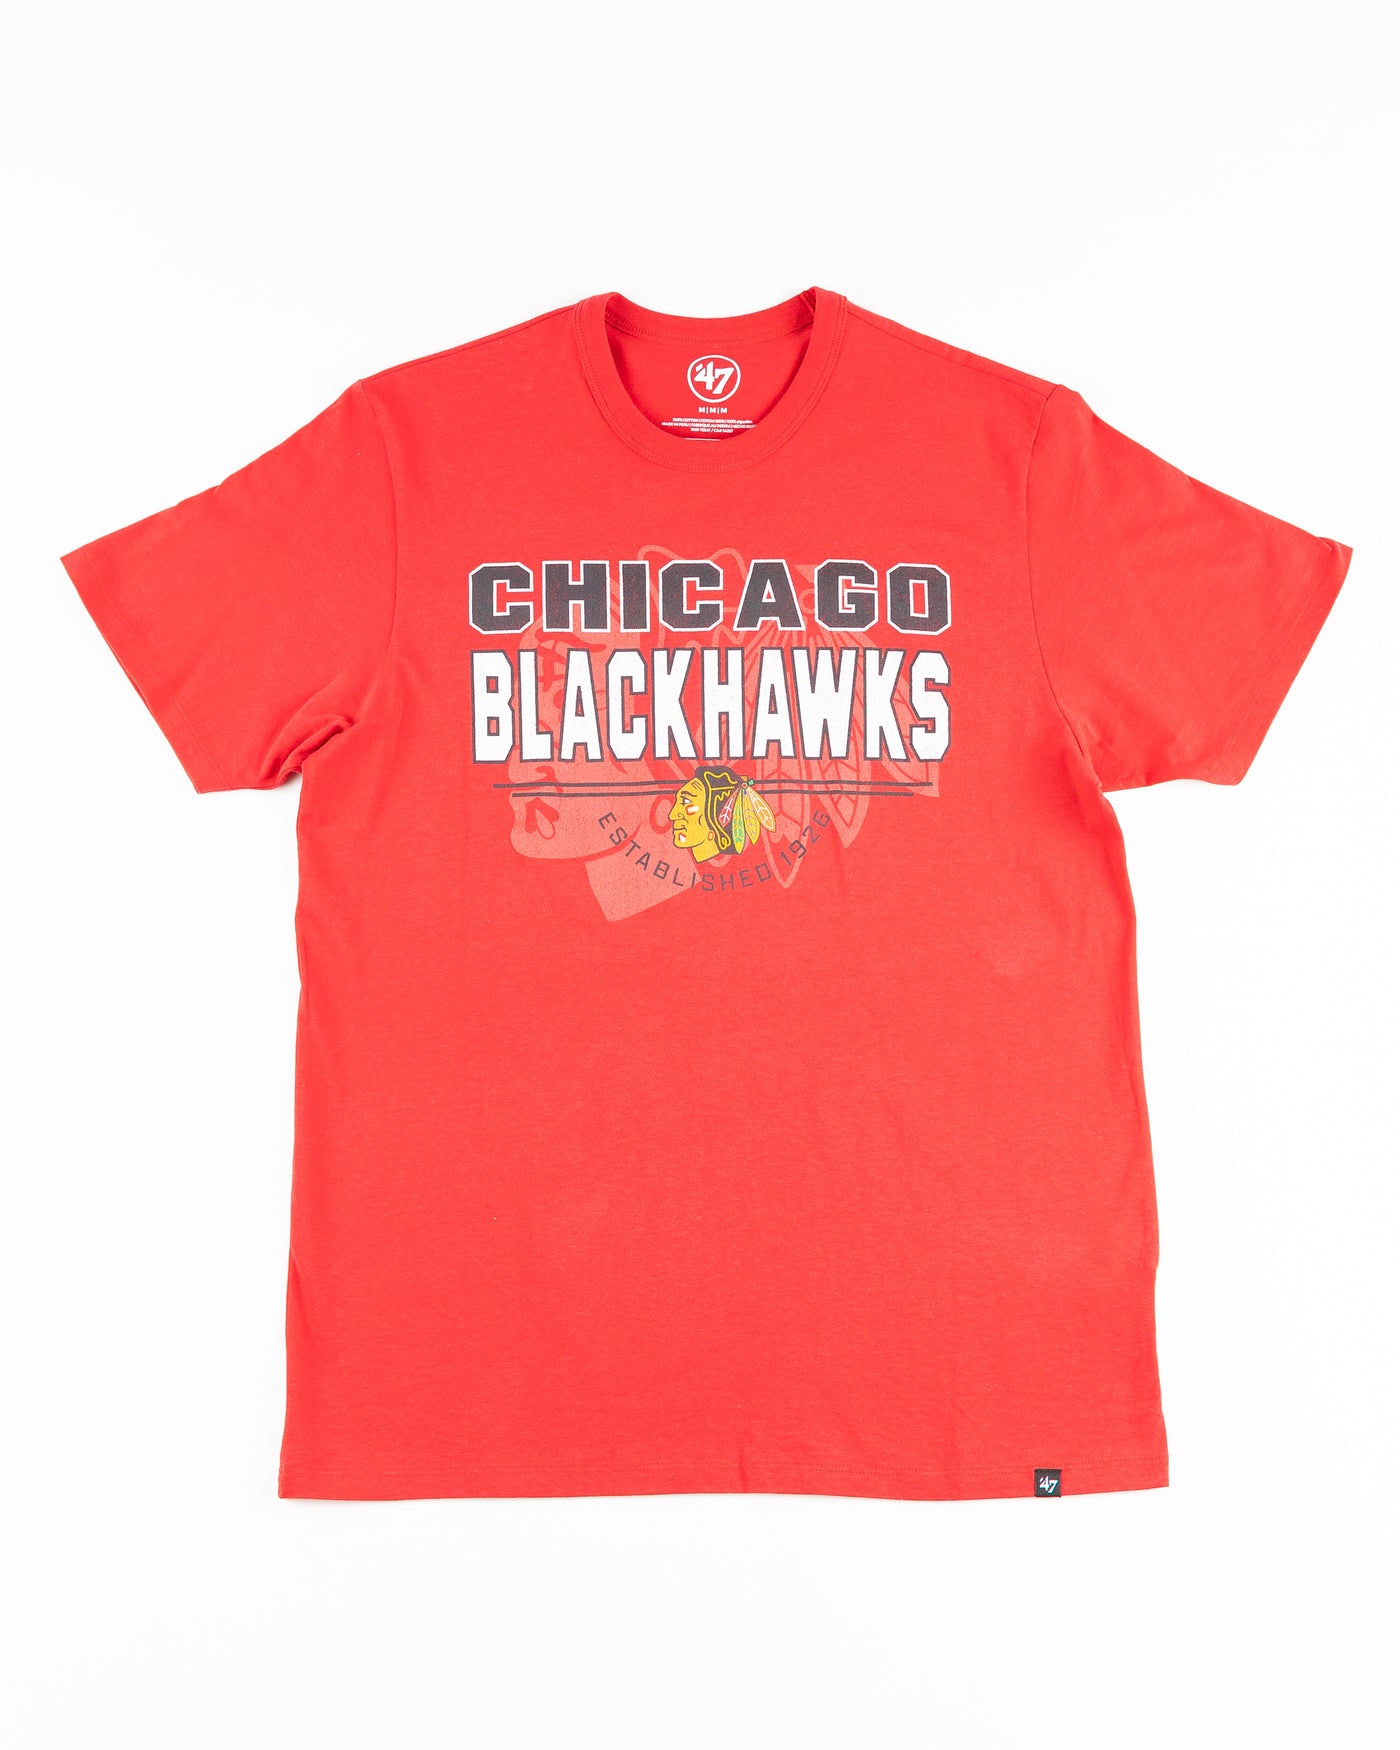 '47 brand red short sleeve tee with Chicago Blackhawks graphic across front - front lay flat